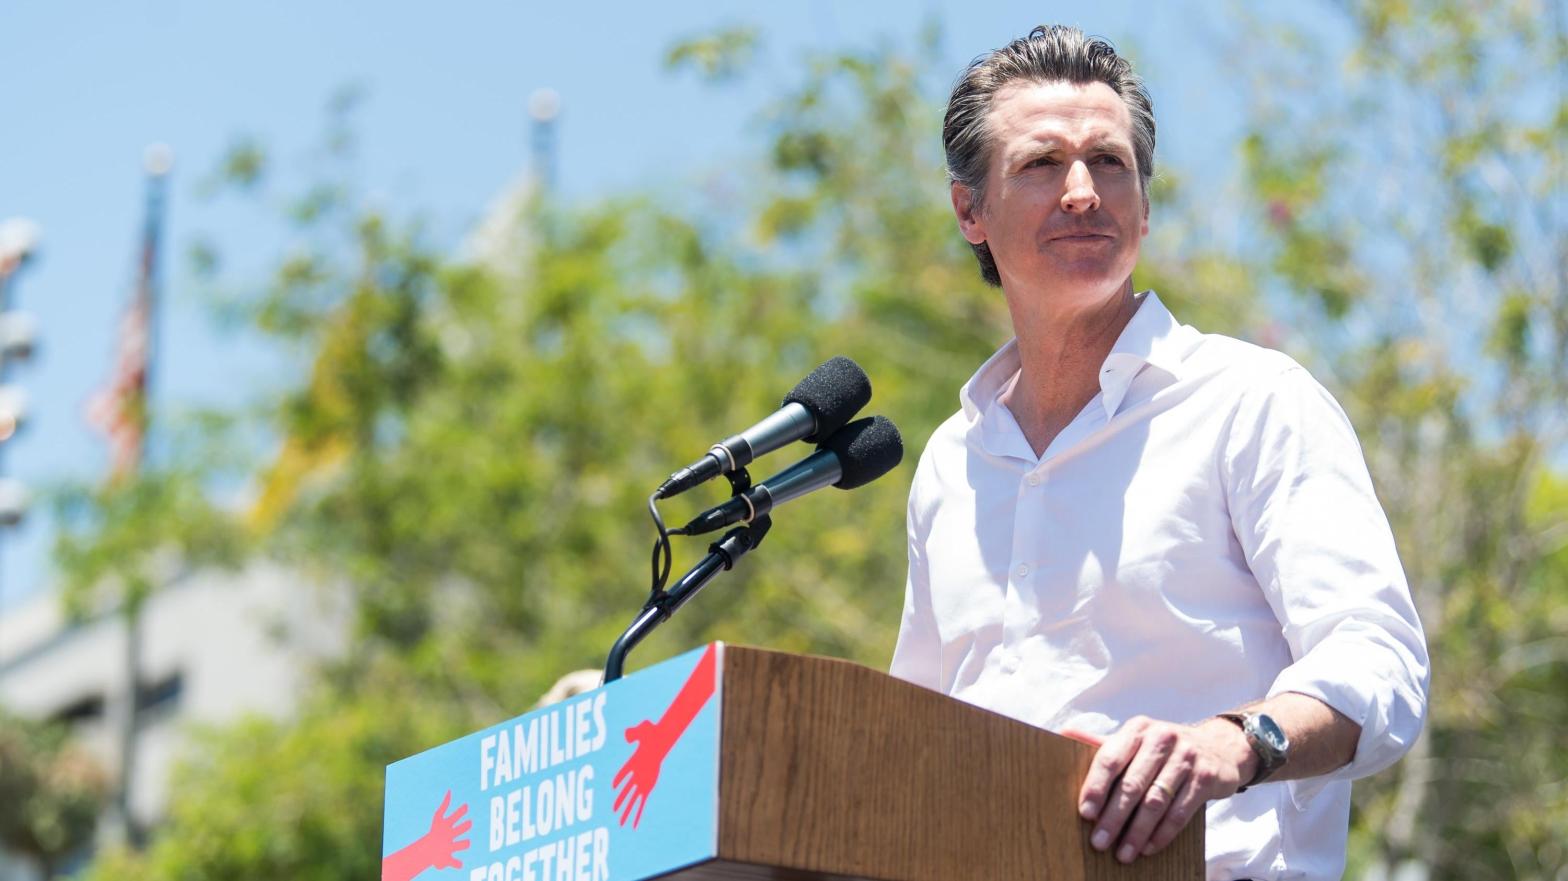 Newsom has served as governor of California since his inauguration in 2019. (Image: Emma McIntyre, Getty Images)